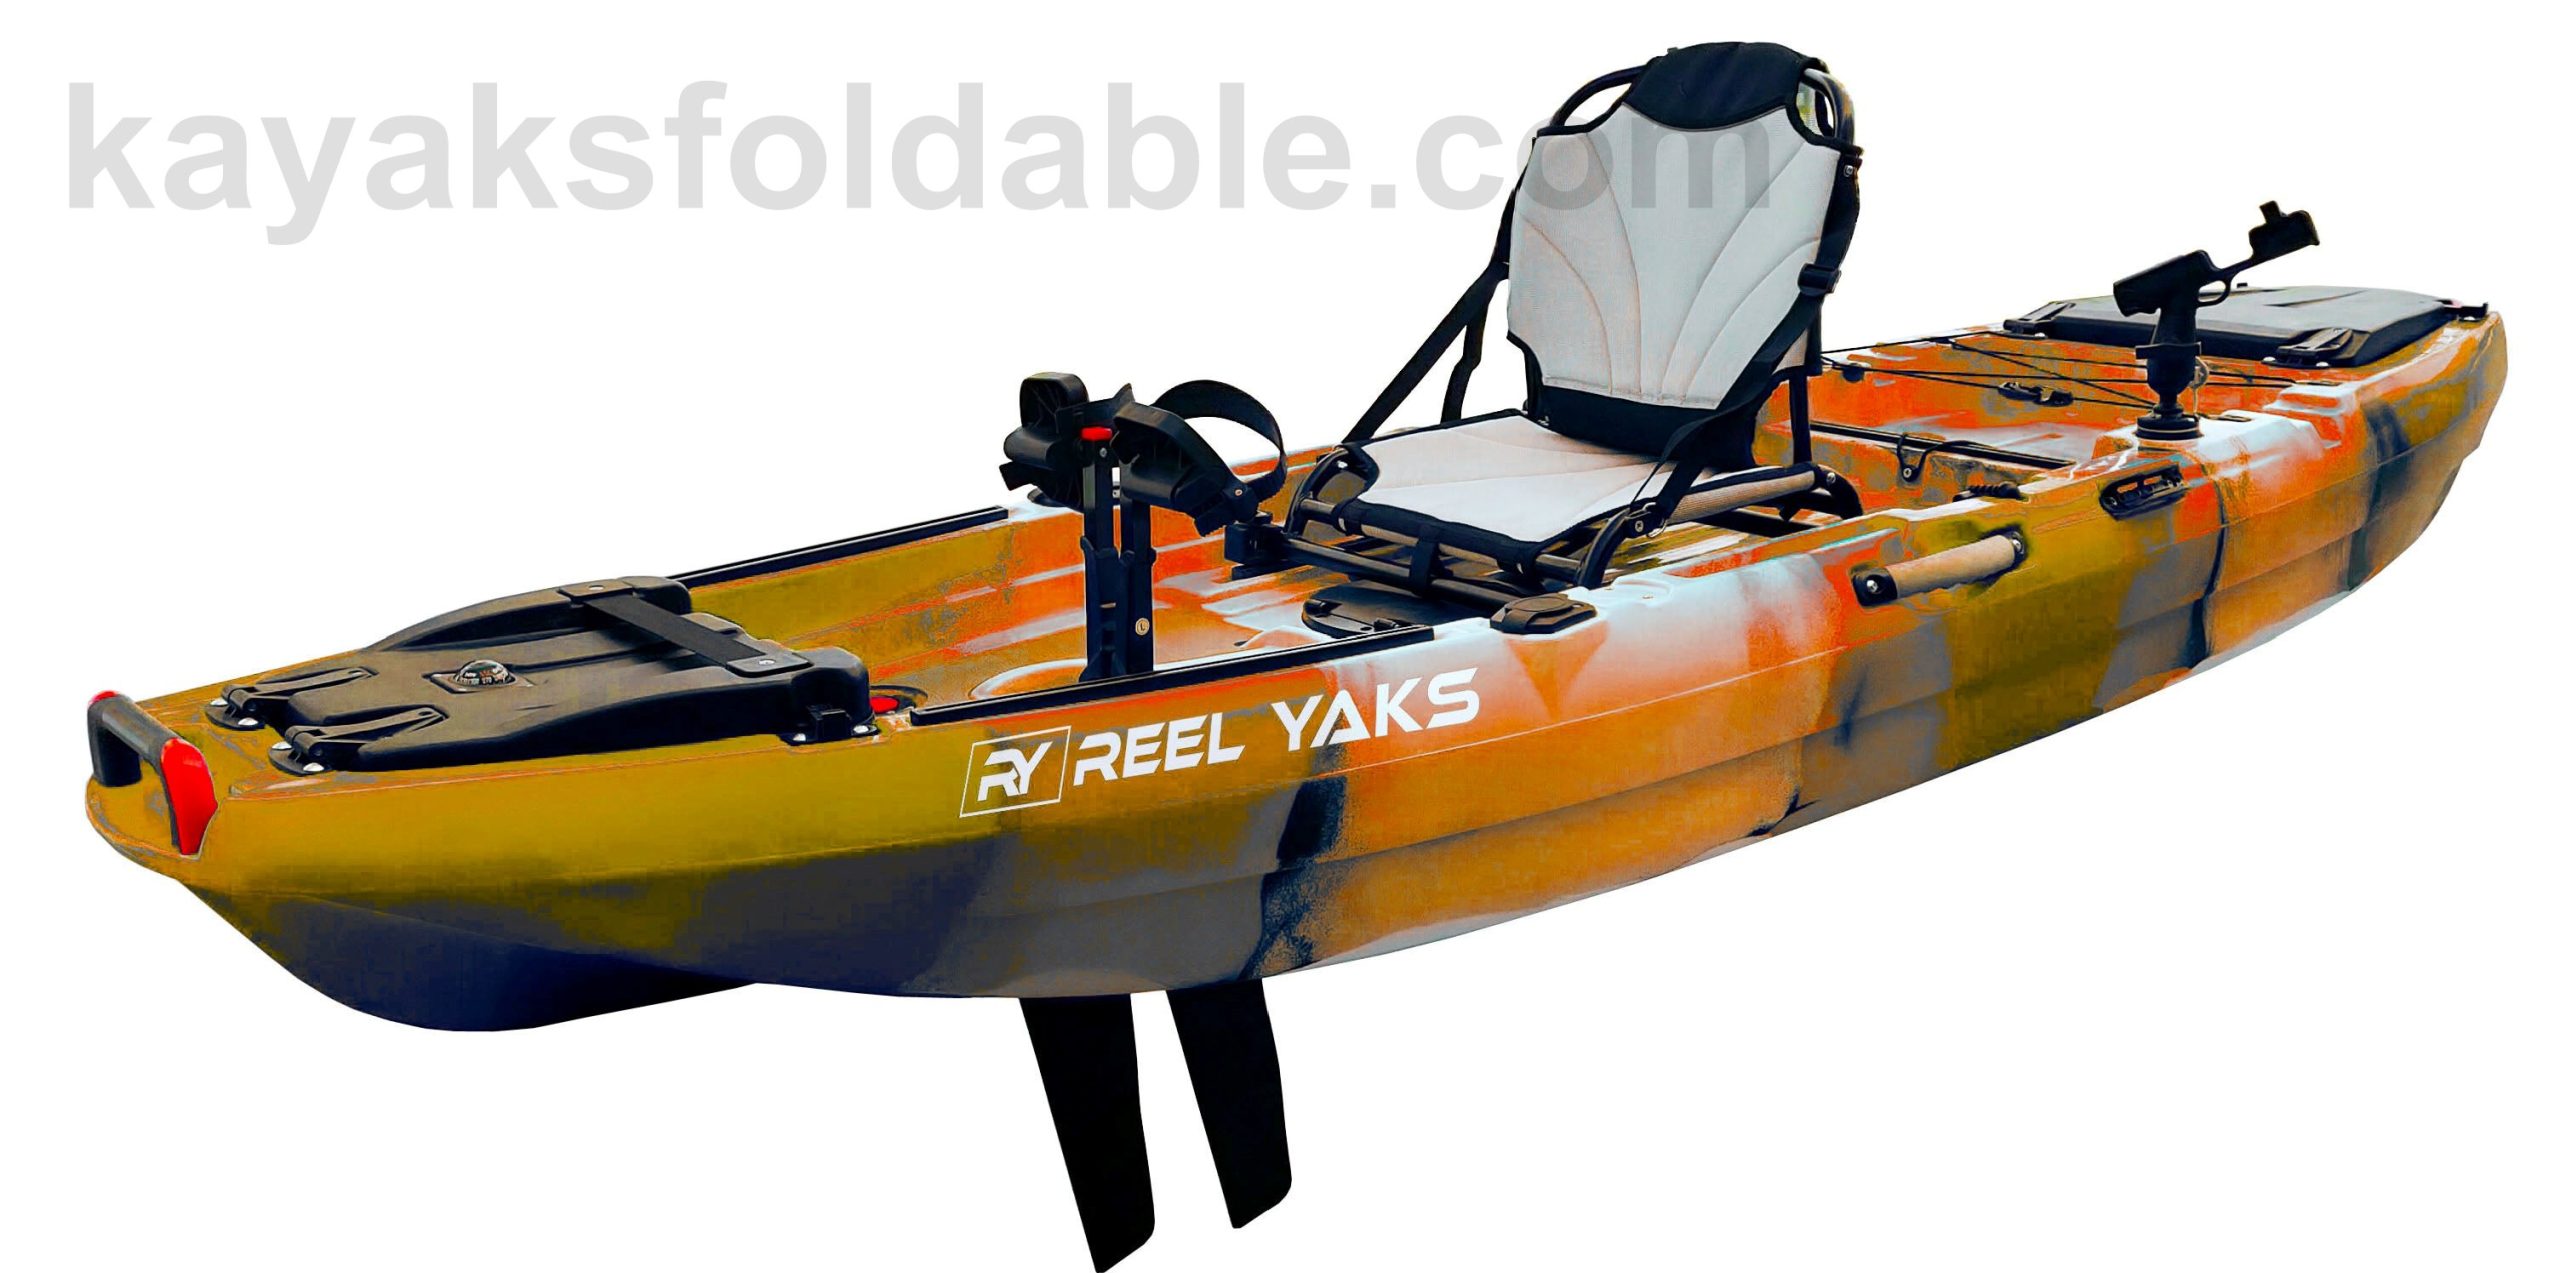 Exquisite 10' Reach Propeller Drive Fishing Kayak, Adults youths kids